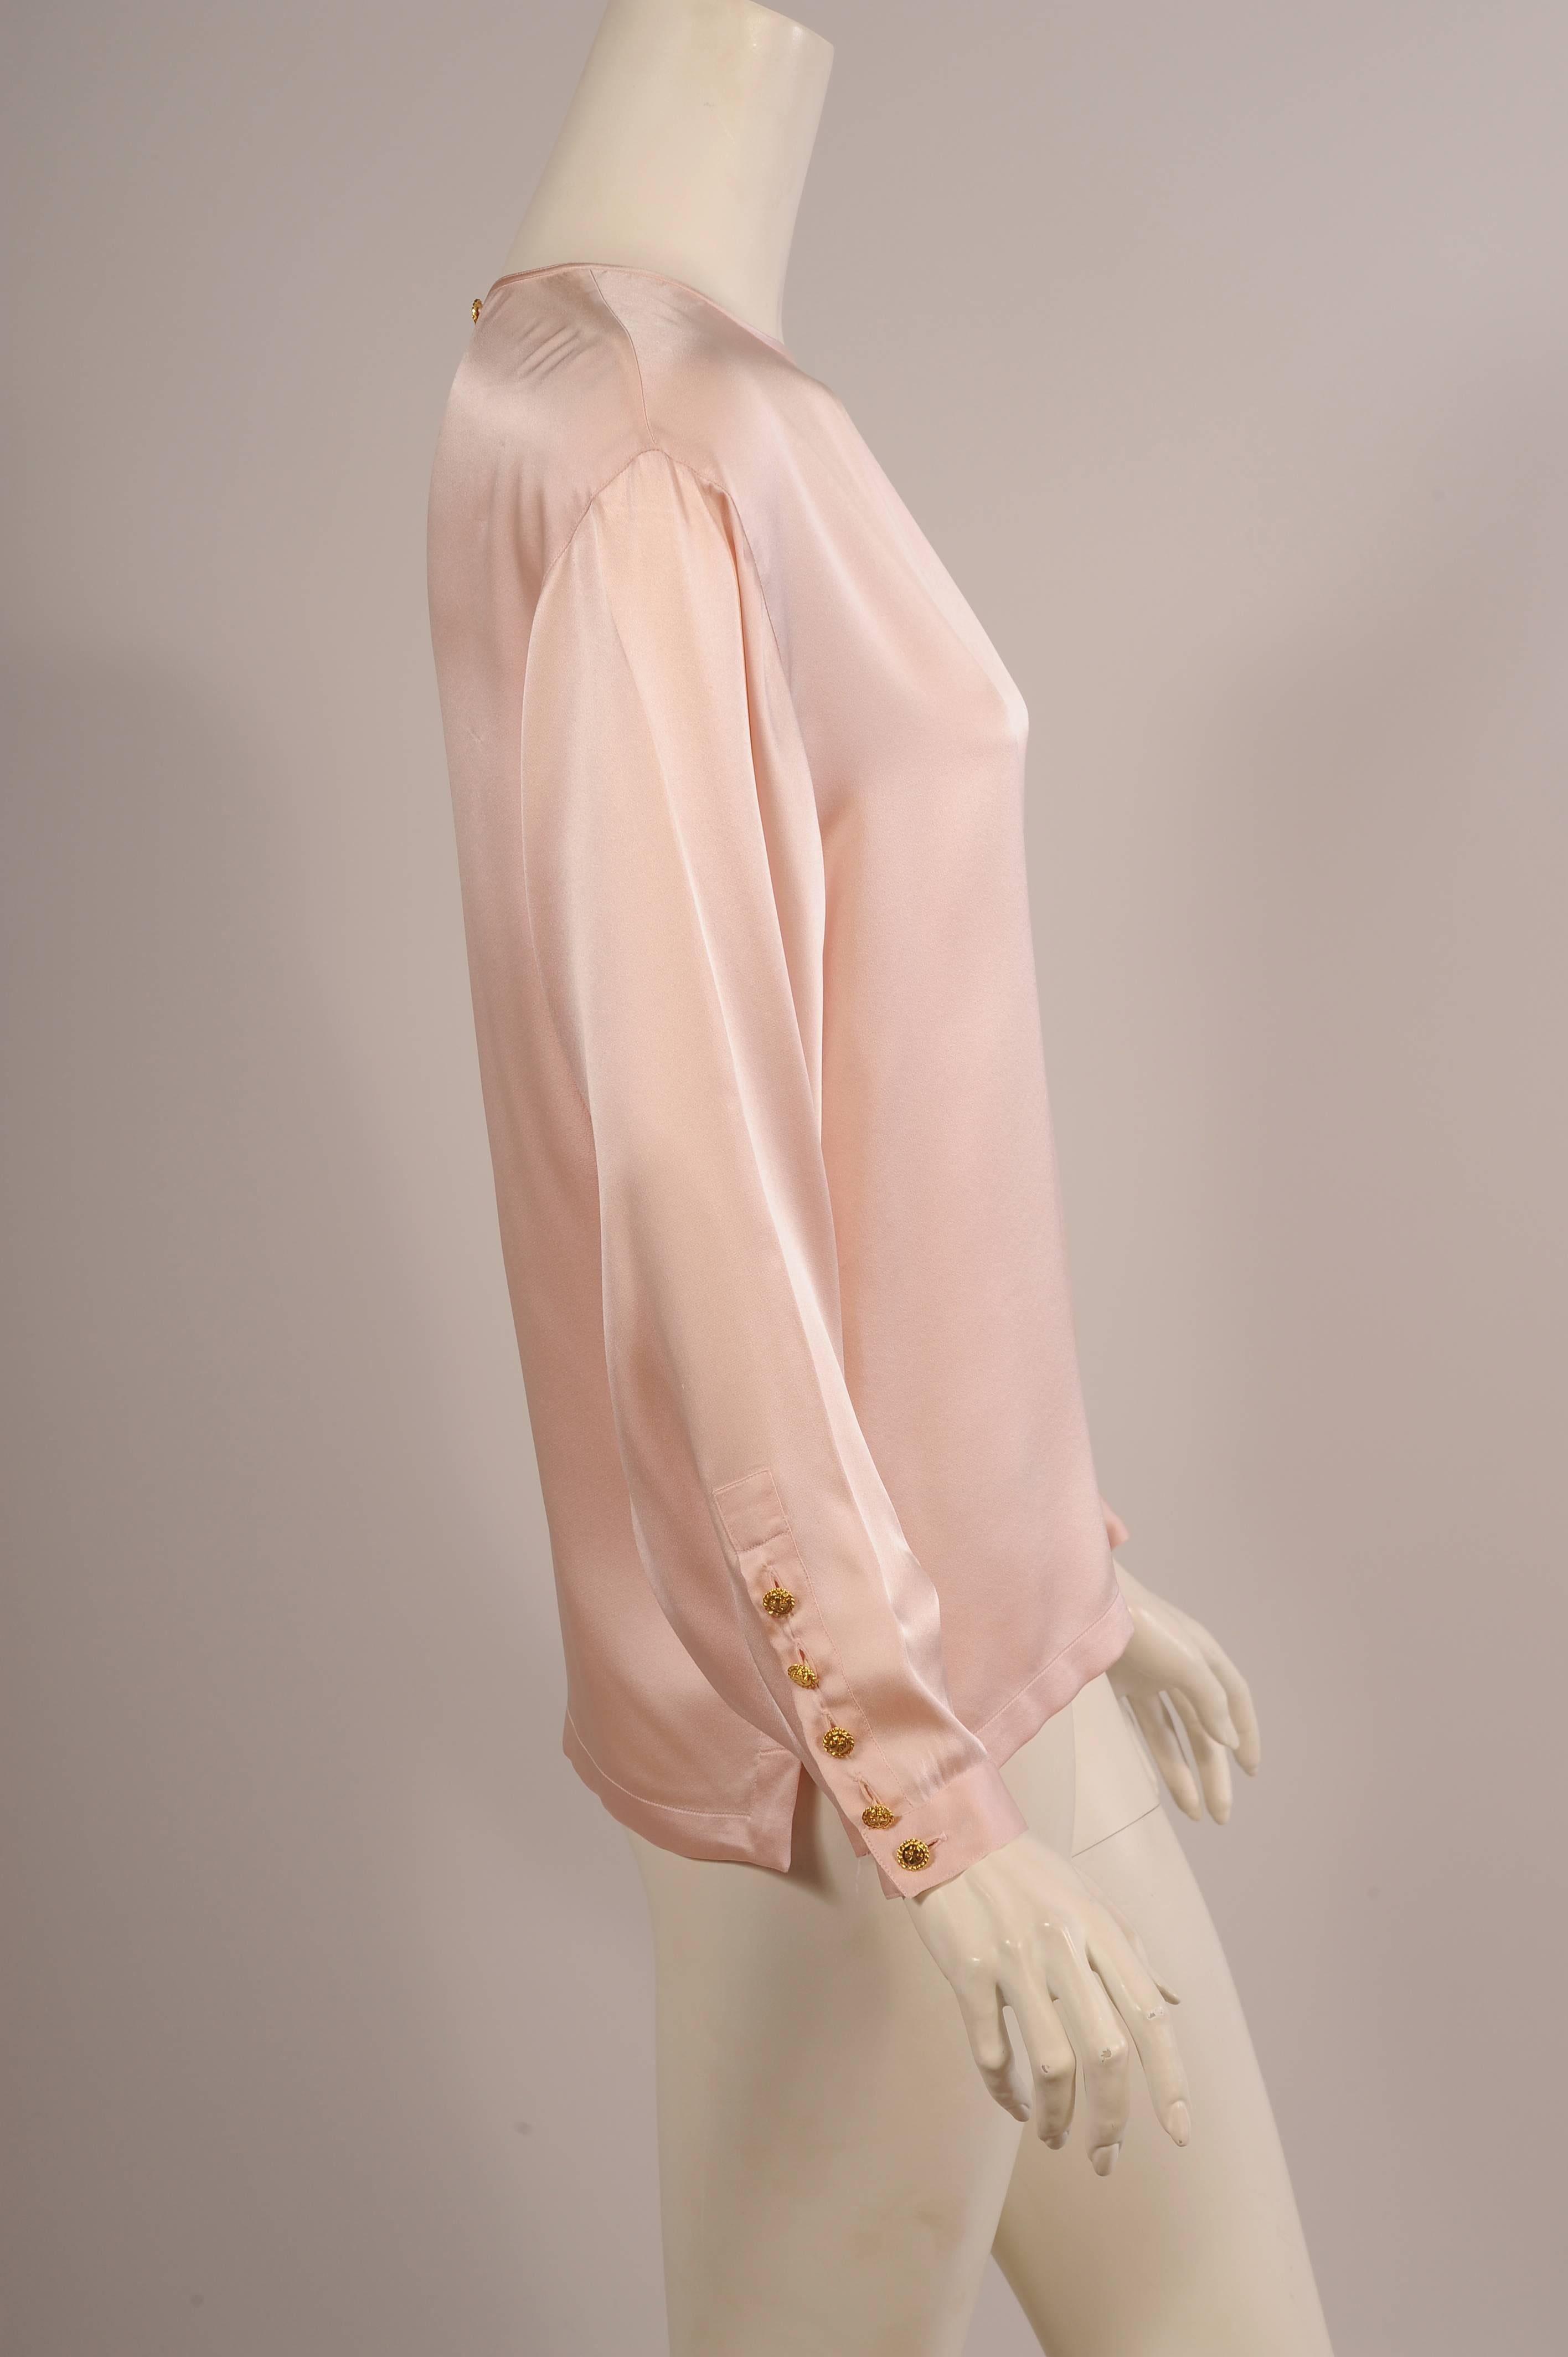 This gorgeous pale pink silk charmeuse blouse just slides on over your head. There is a shamrock button and silk loop at the center back. The long sleeves have five matching buttons with shamrocks. The hemline is split on each side so that the